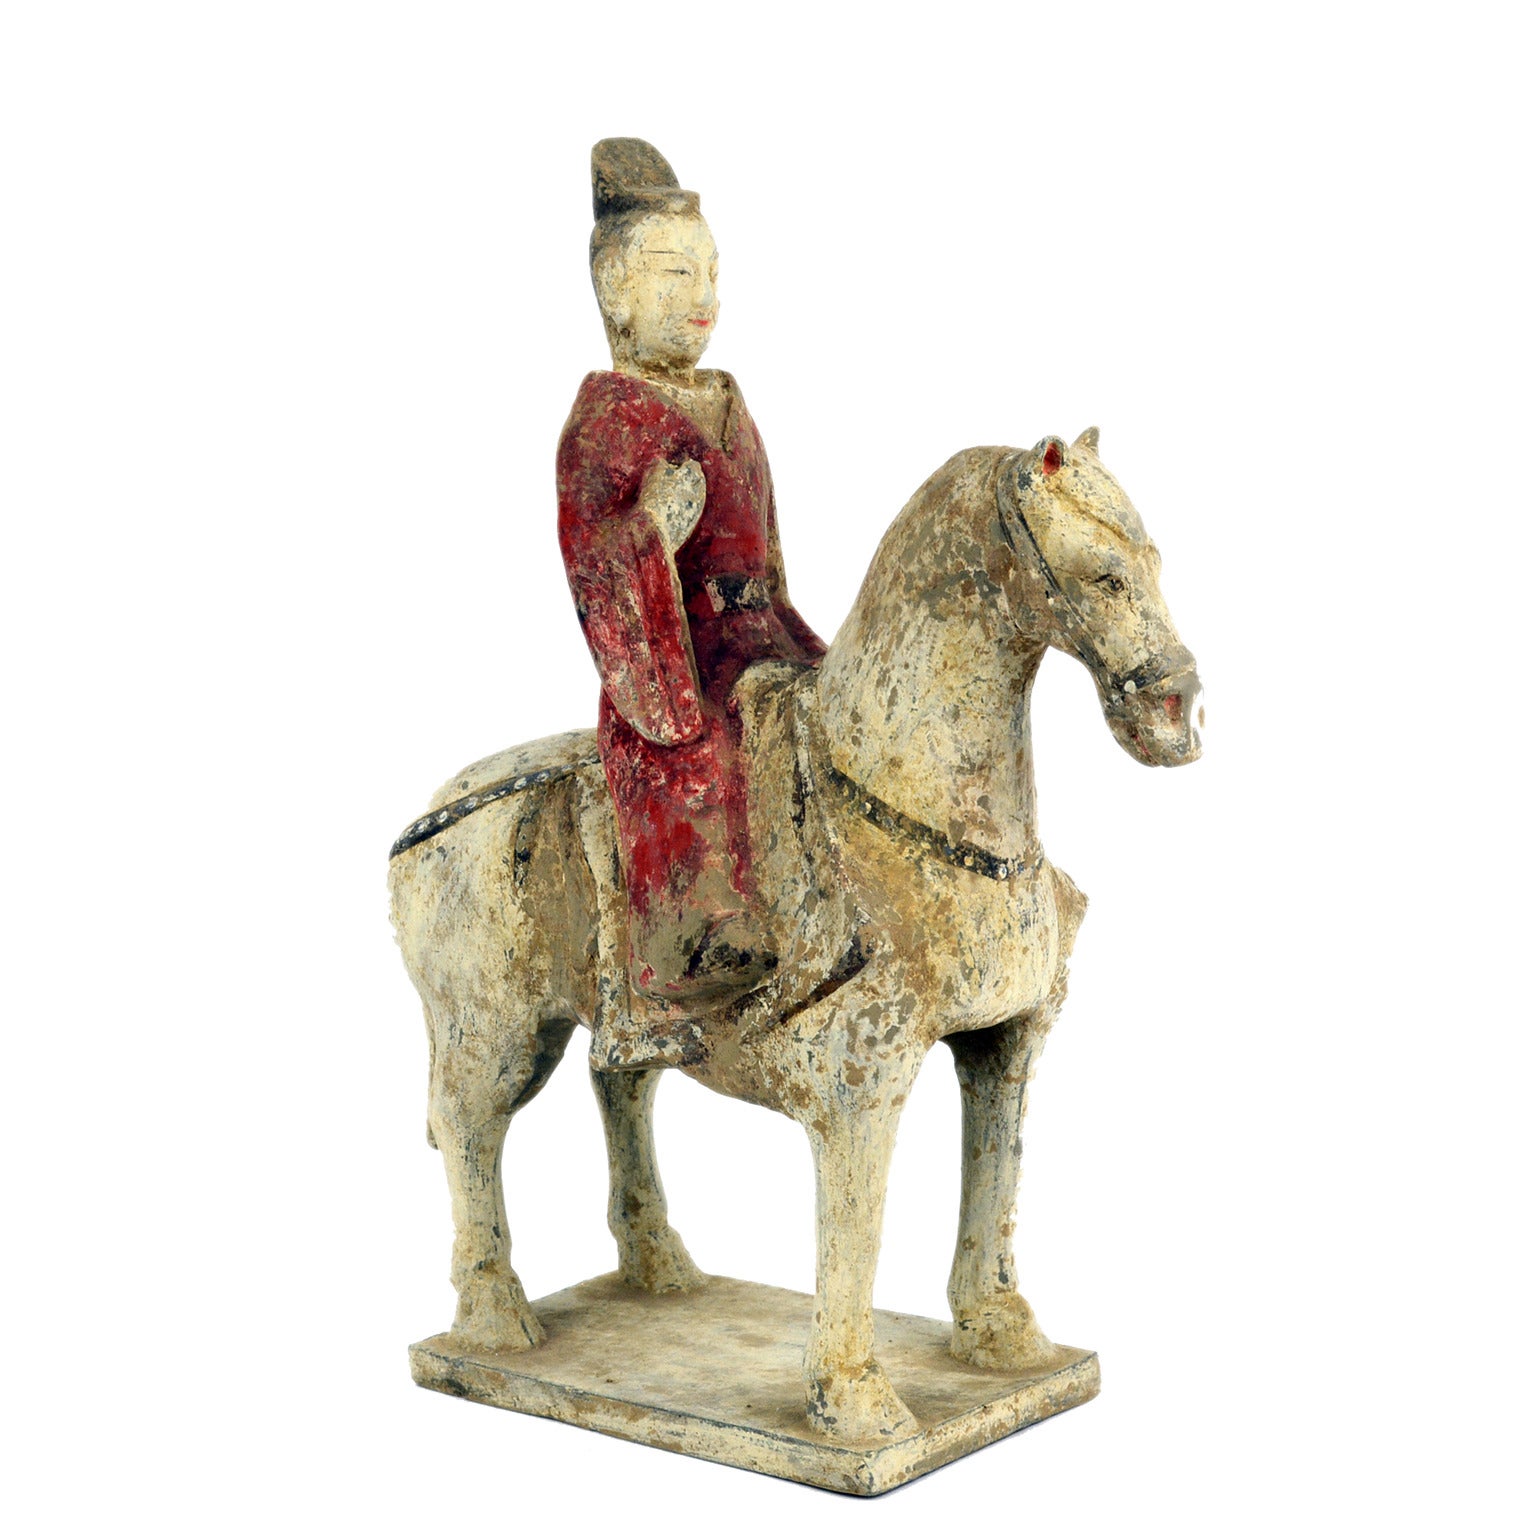 Northern Qi Dynasty Dignitary Sculpture